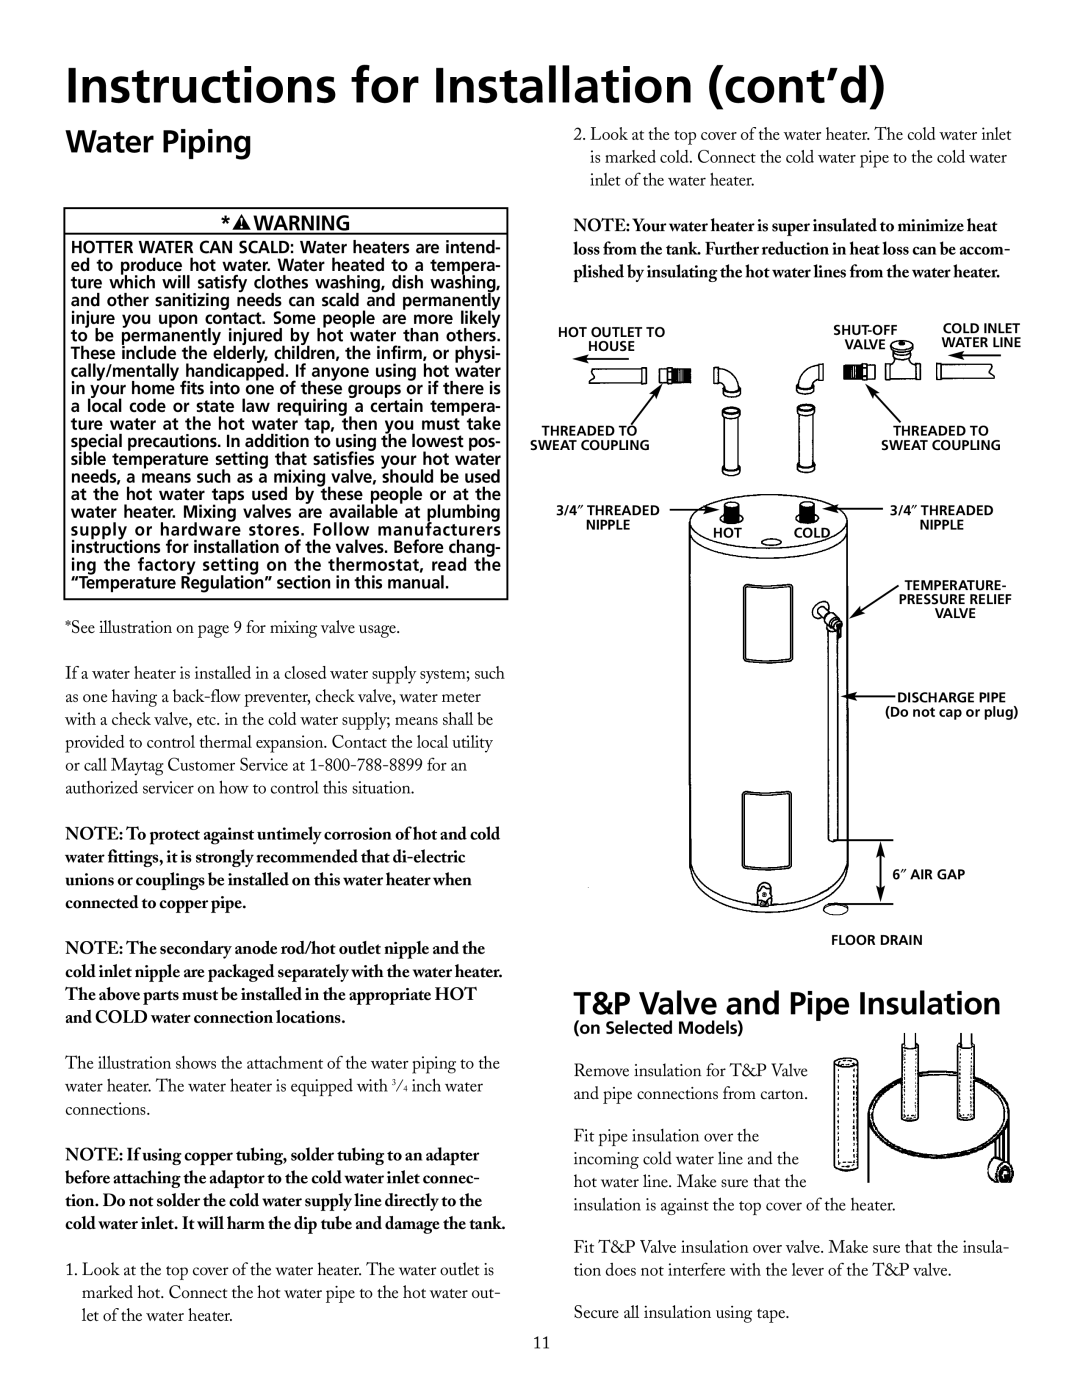 Maytag HRE3930T Water Piping, T&P Valve and Pipe Insulation, Instructions for Installation cont’d, on Selected Models 